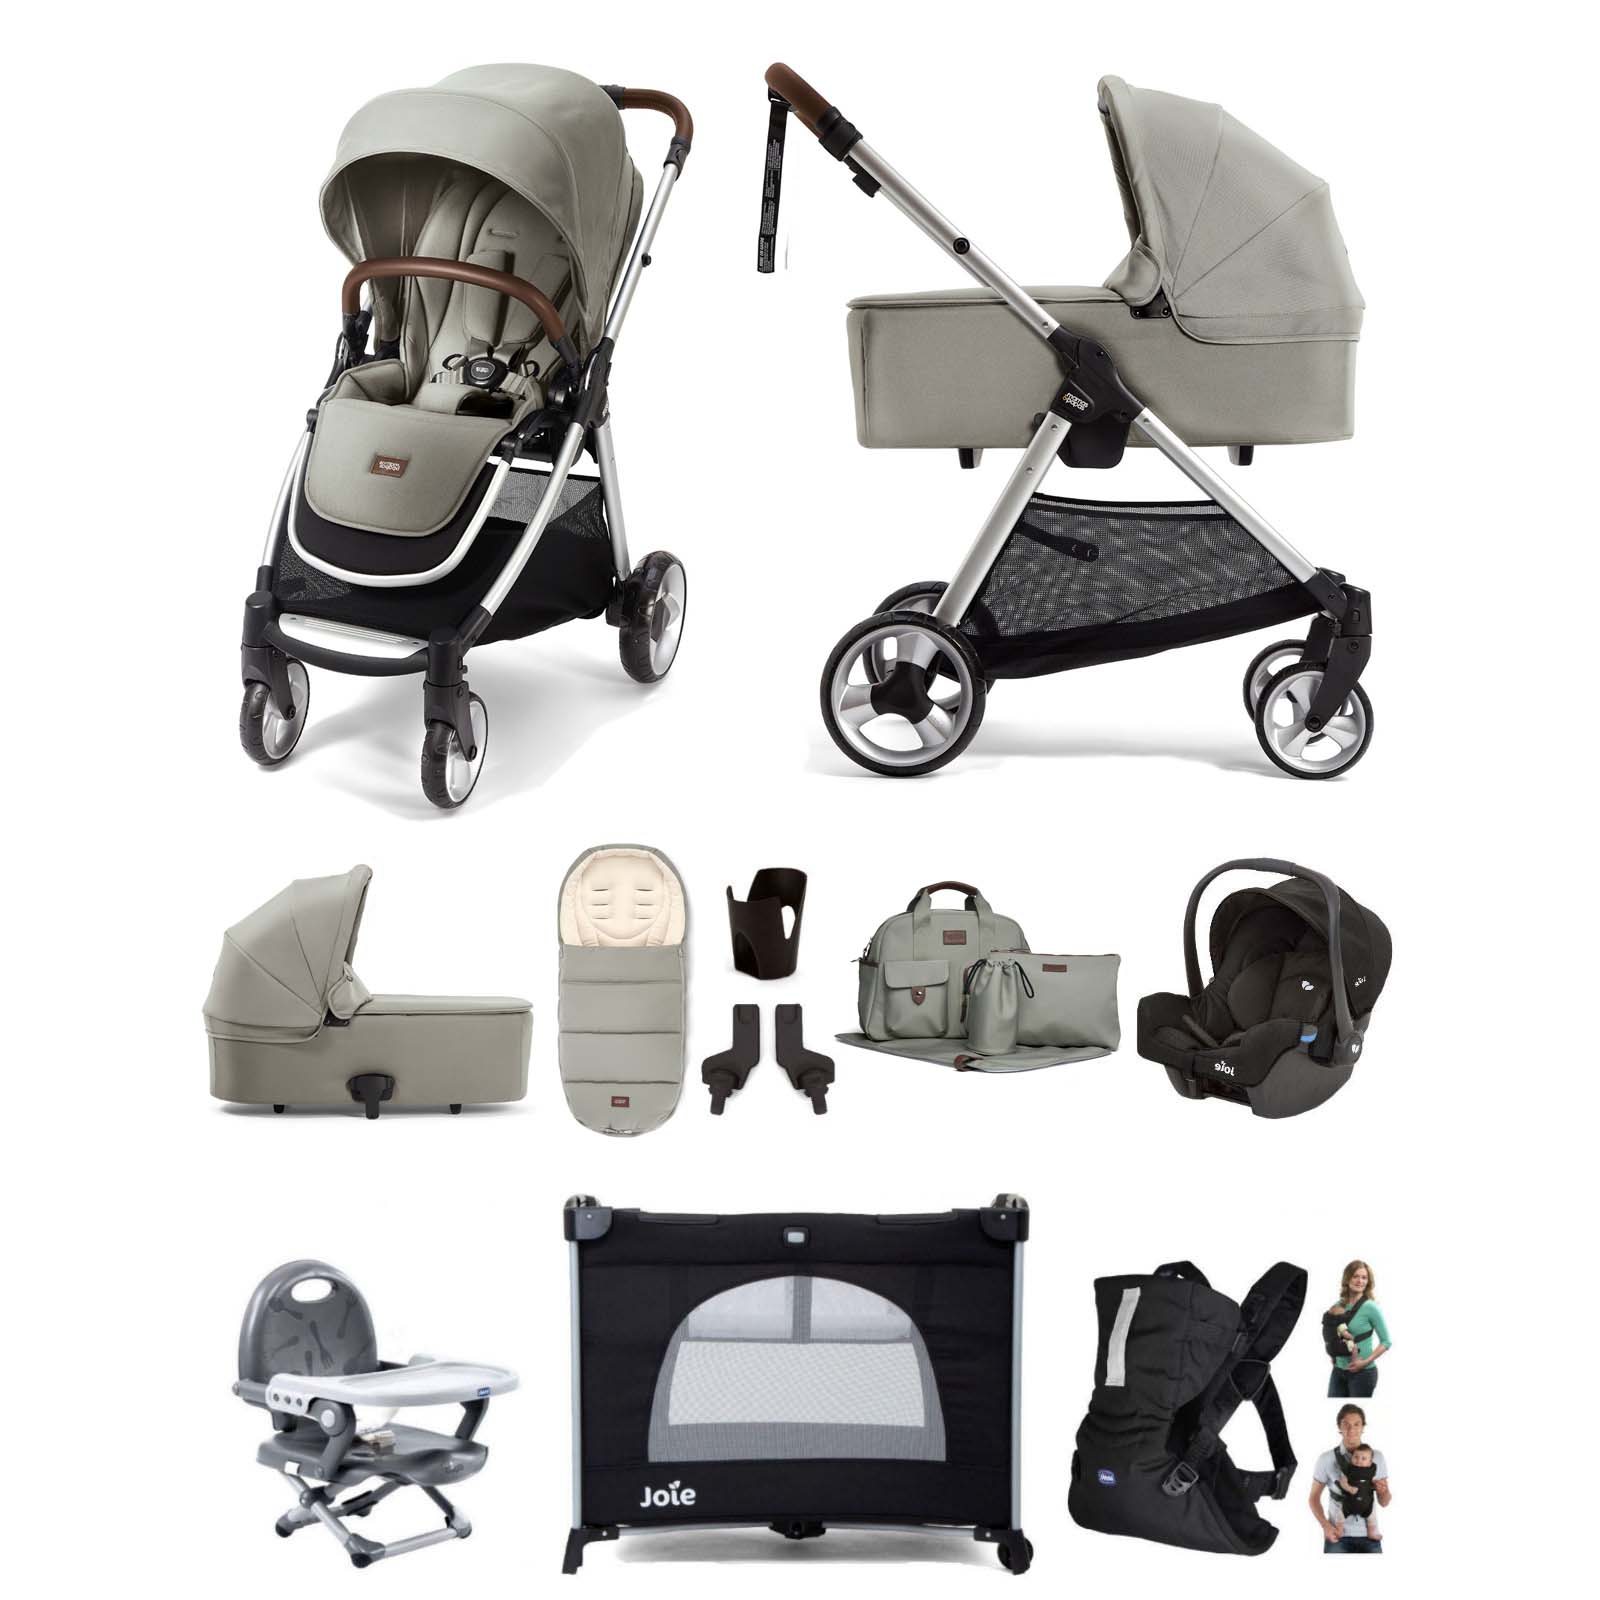 Mamas & Papas Flip XT2 10pc Essentials (Gemm Car Seat) Everything You Need Travel System Bundle with Carrycot - Sage Green